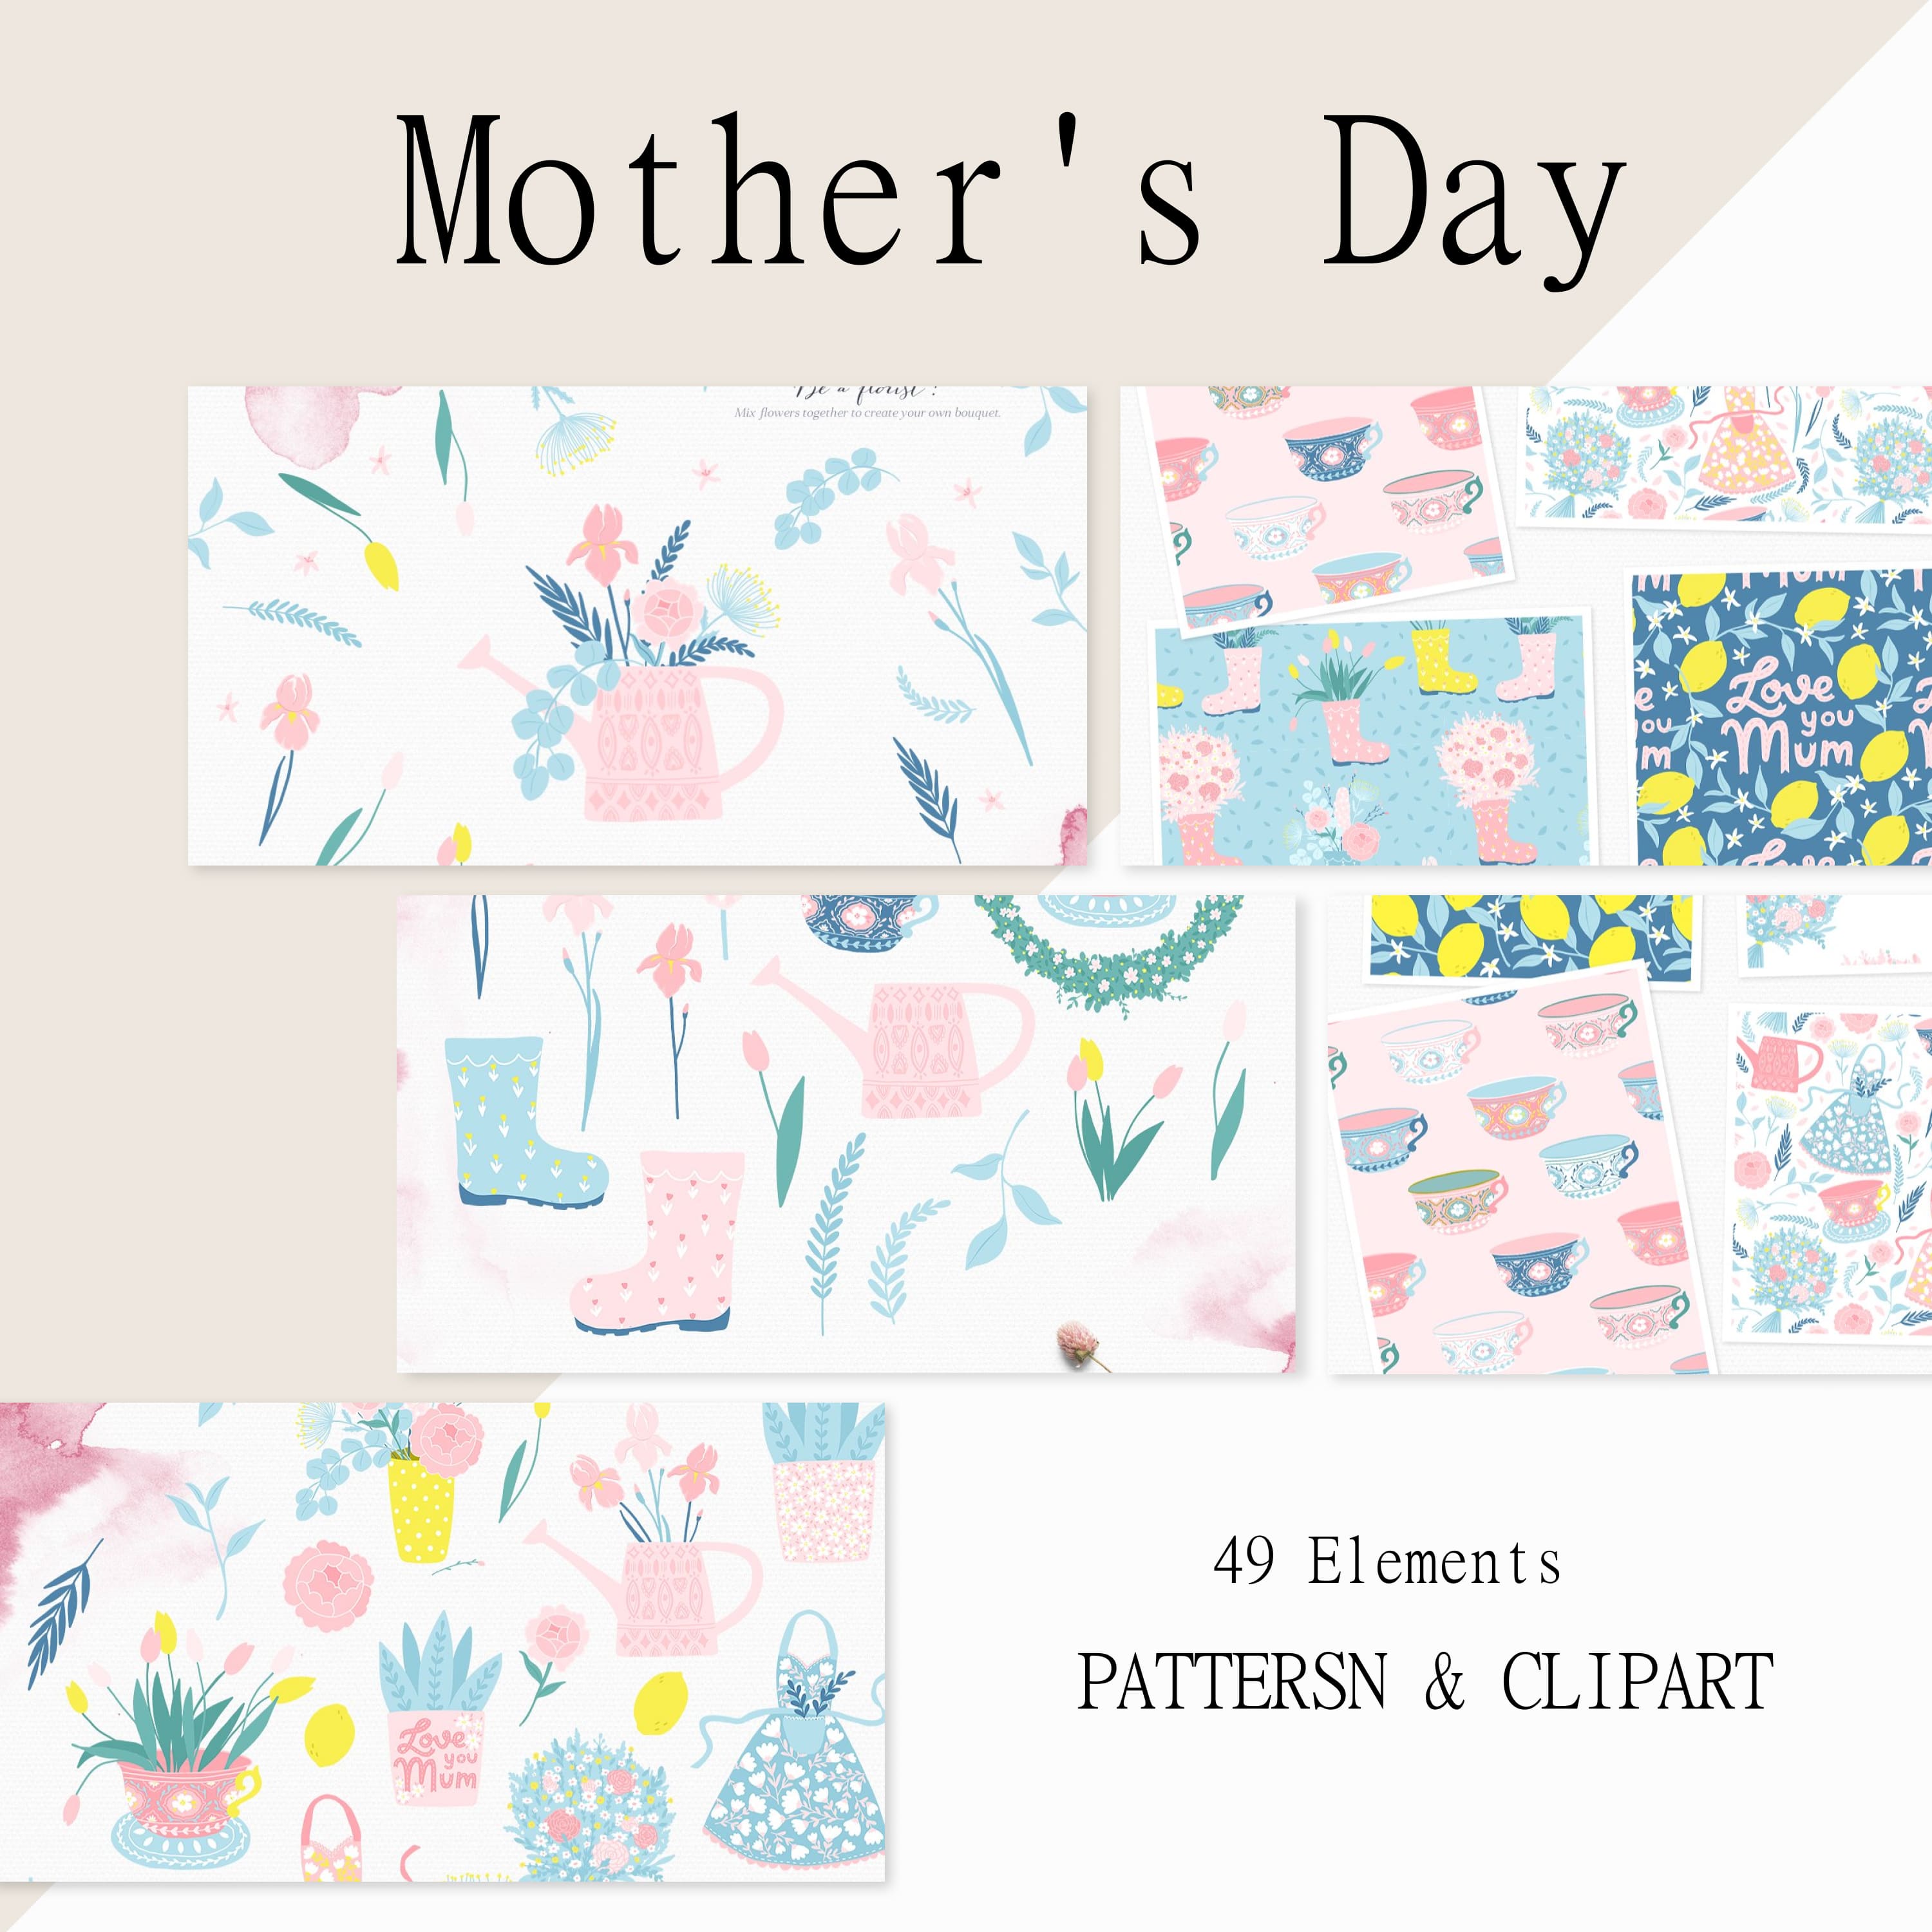 Mother's Day prints and patterns.